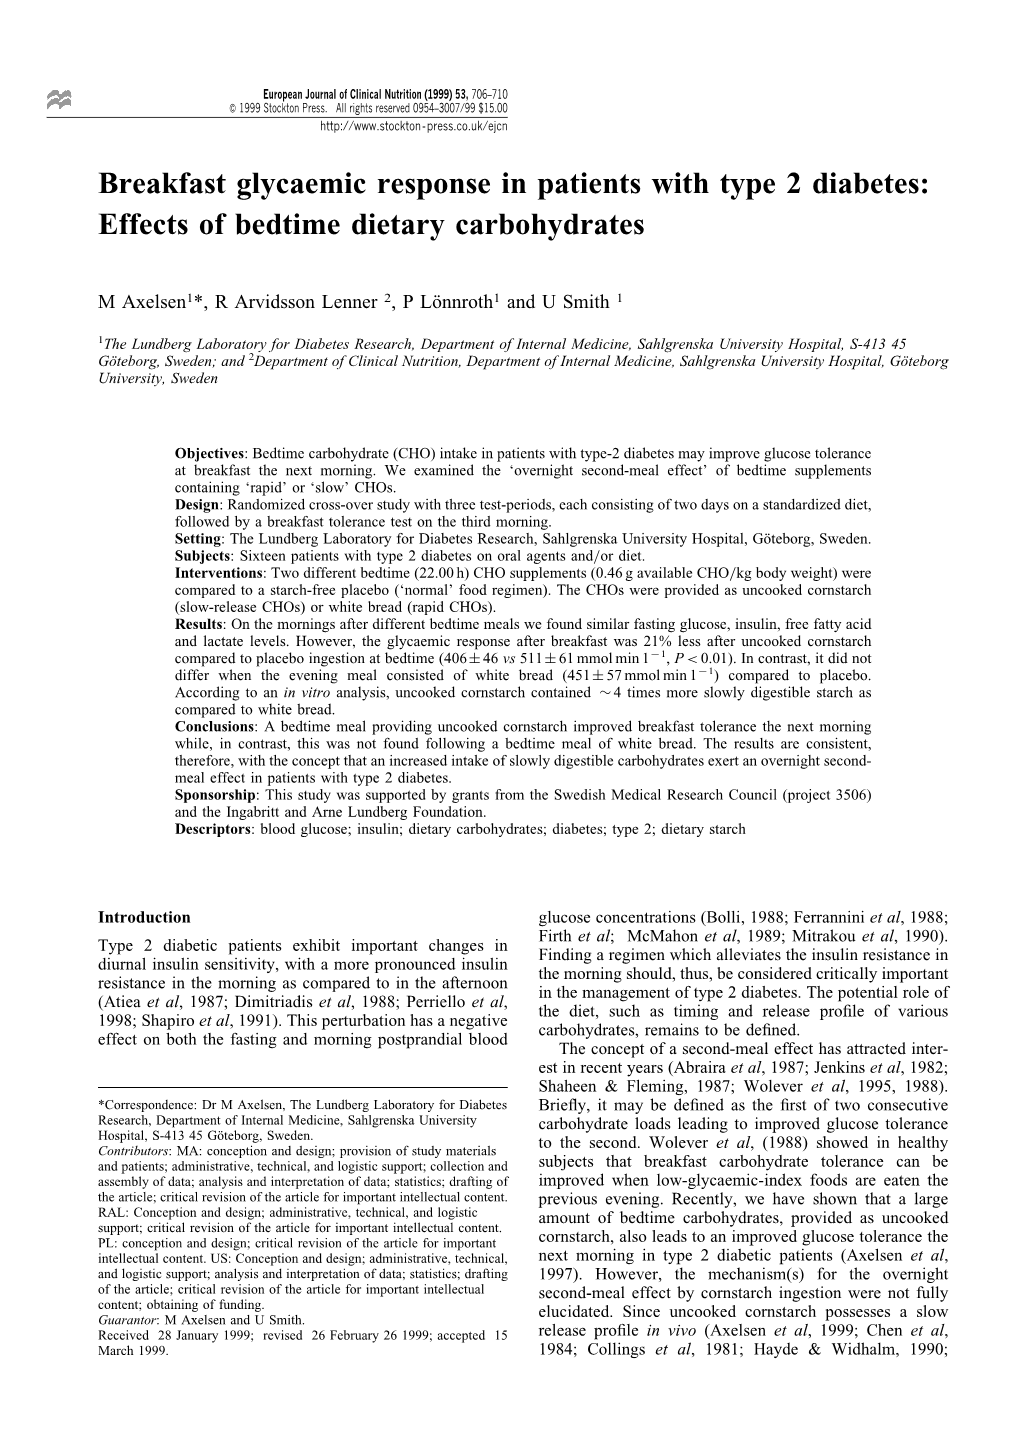 Breakfast Glycaemic Response in Patients with Type 2 Diabetes: Effects of Bedtime Dietary Carbohydrates